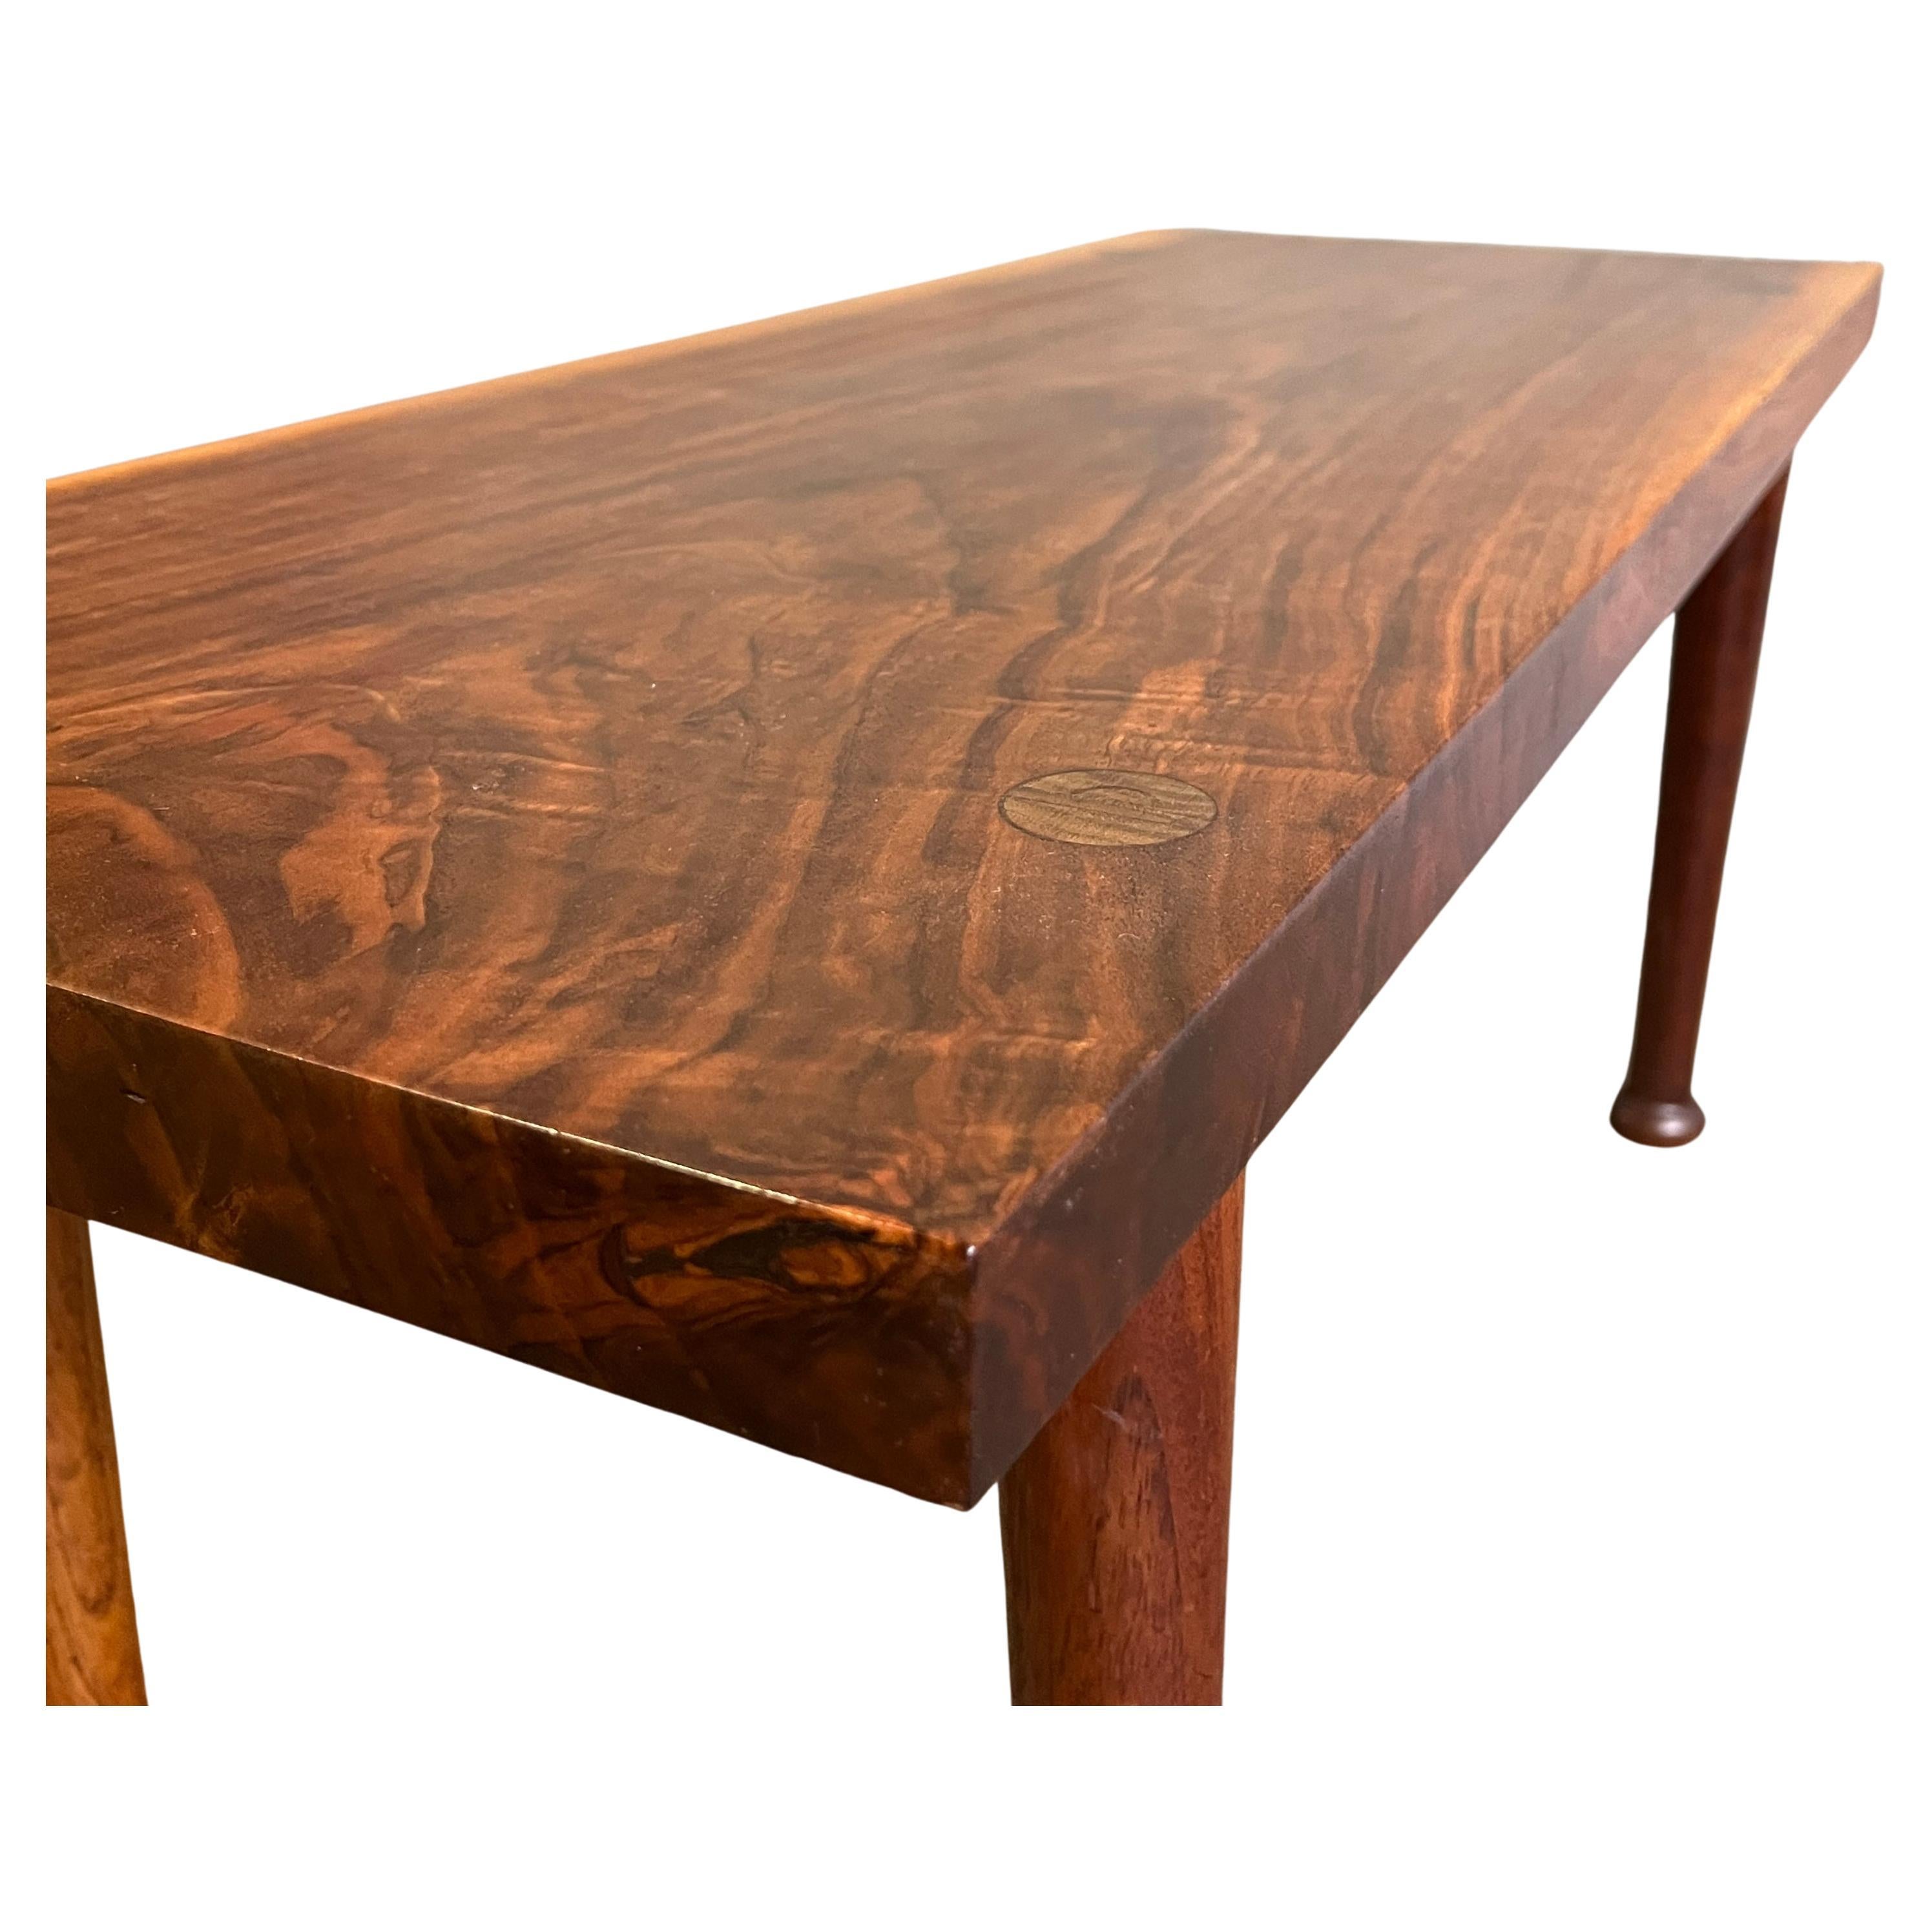 Classic American Studio Craft solid beautiful Hardwood & walnut small table or bench . Gorgeous black walnut slab on solid wood turned legs with highly crafted joinery. New Hope estate fresh circa 1960s. 

No Labels or signatures. This table is